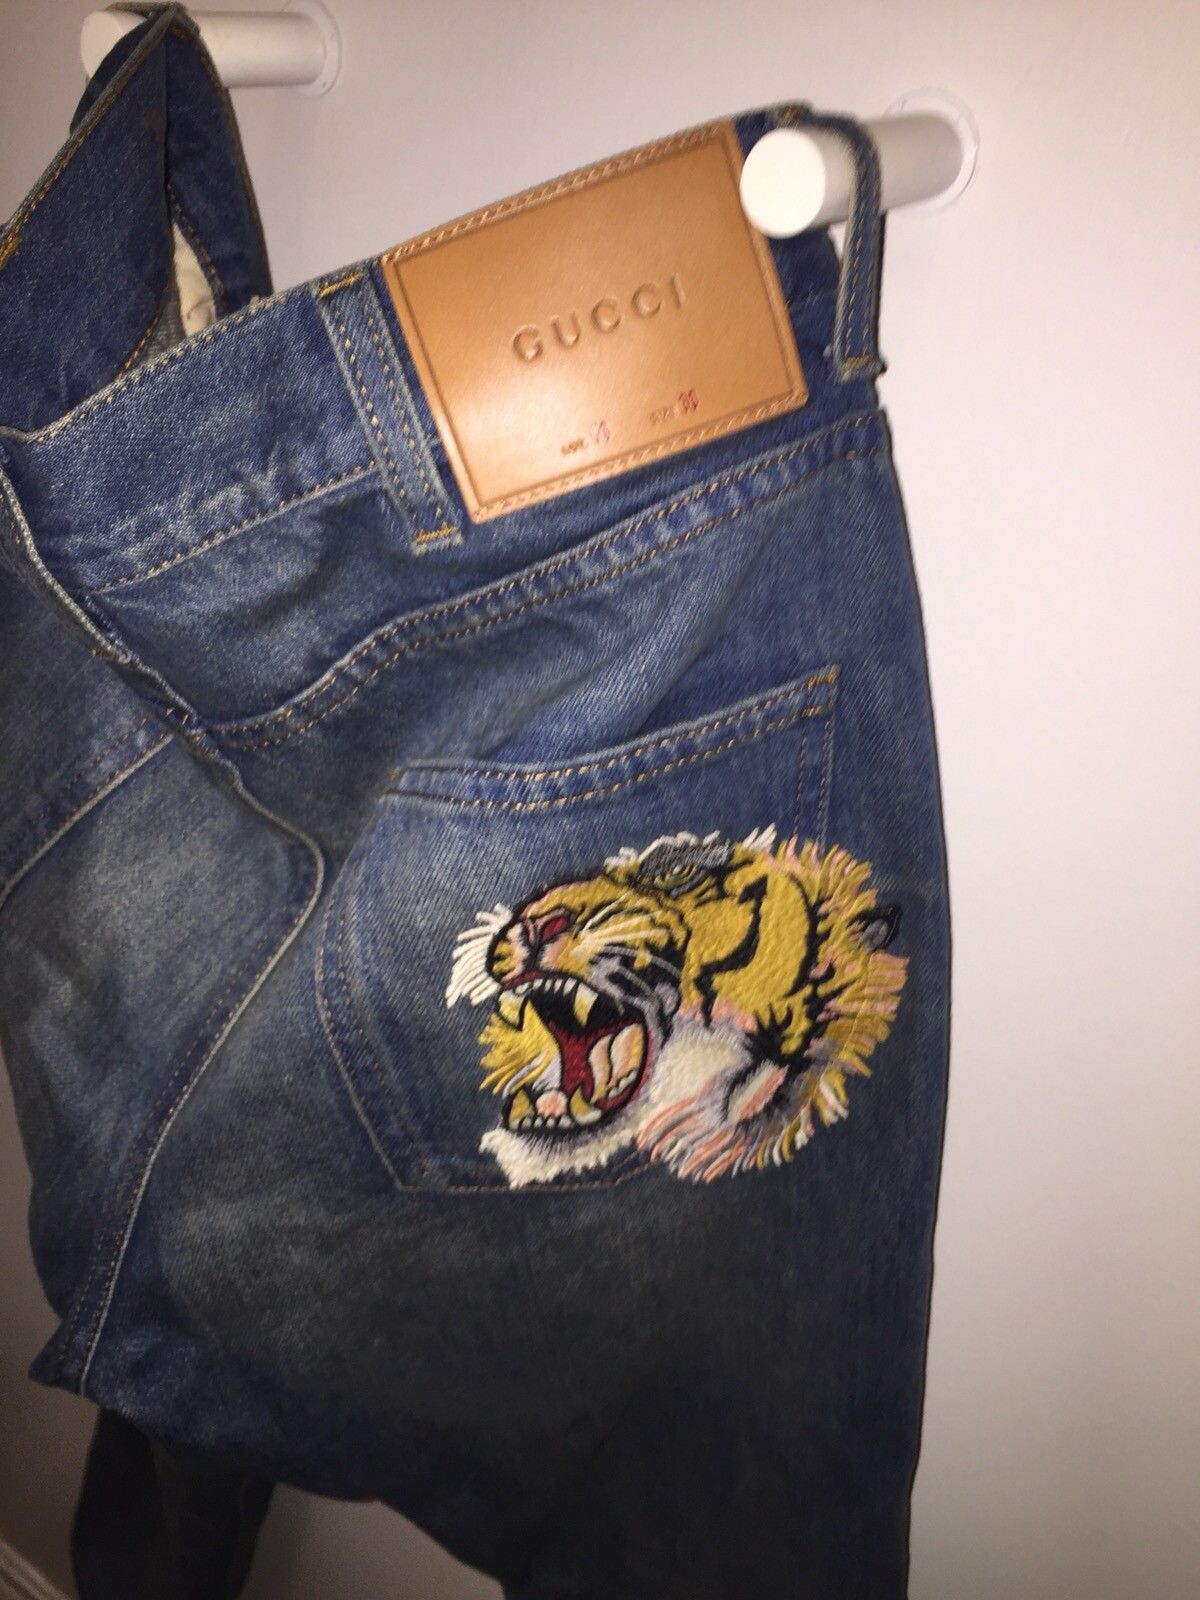 Byg op Footpad Tranquility Gucci Gucci Tiger Embroidered Denim | Grailed